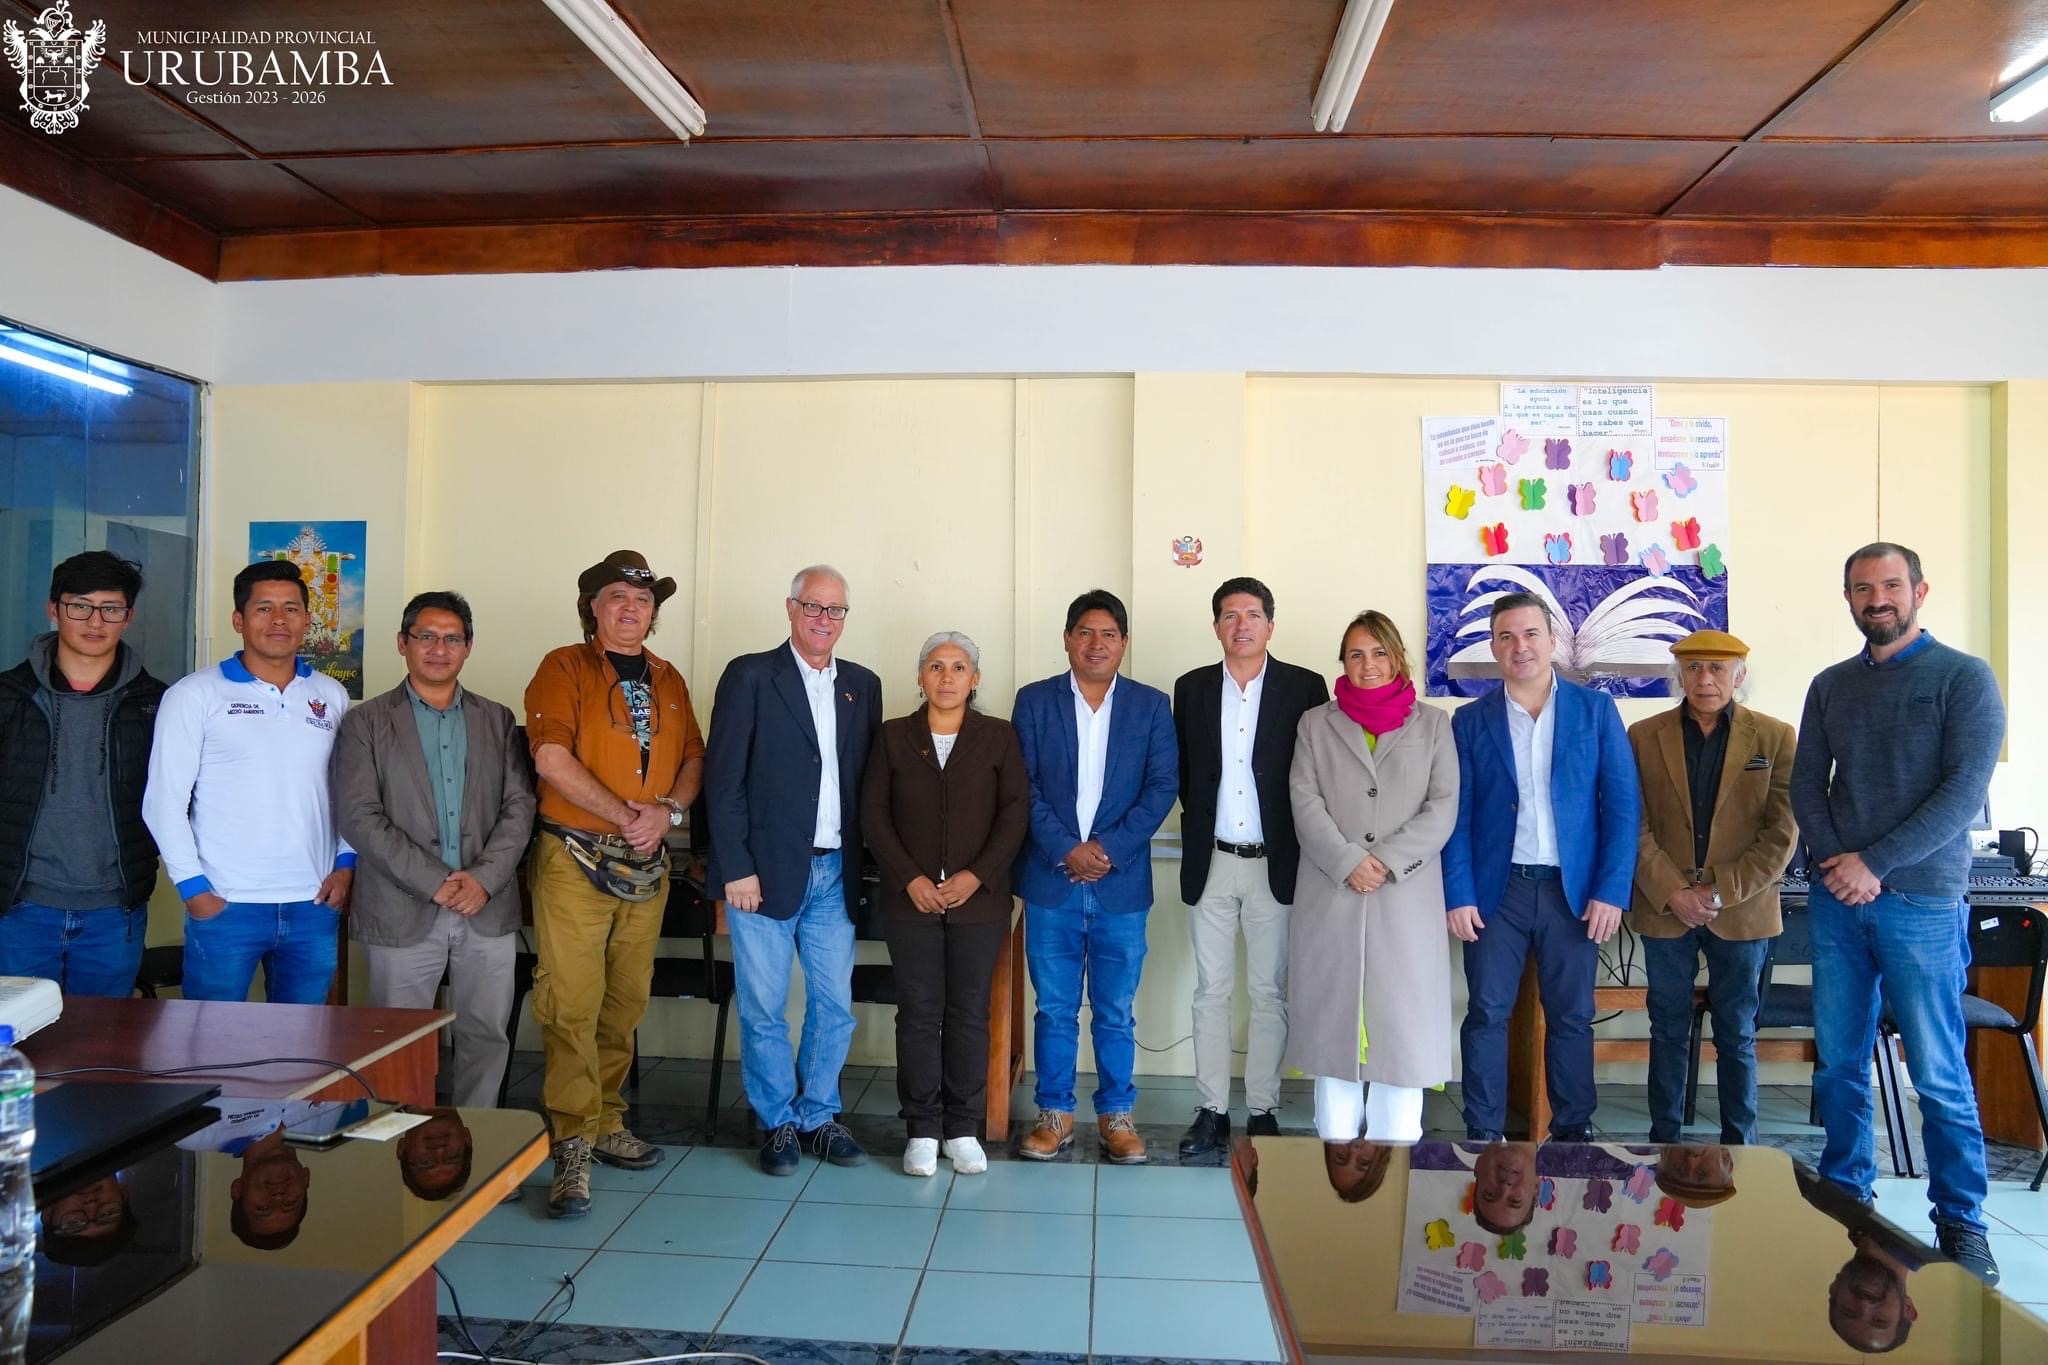 Peru: Round Table for the presentation of the Study on Technologies and Solutions for Solid Waste Management in Urubamba